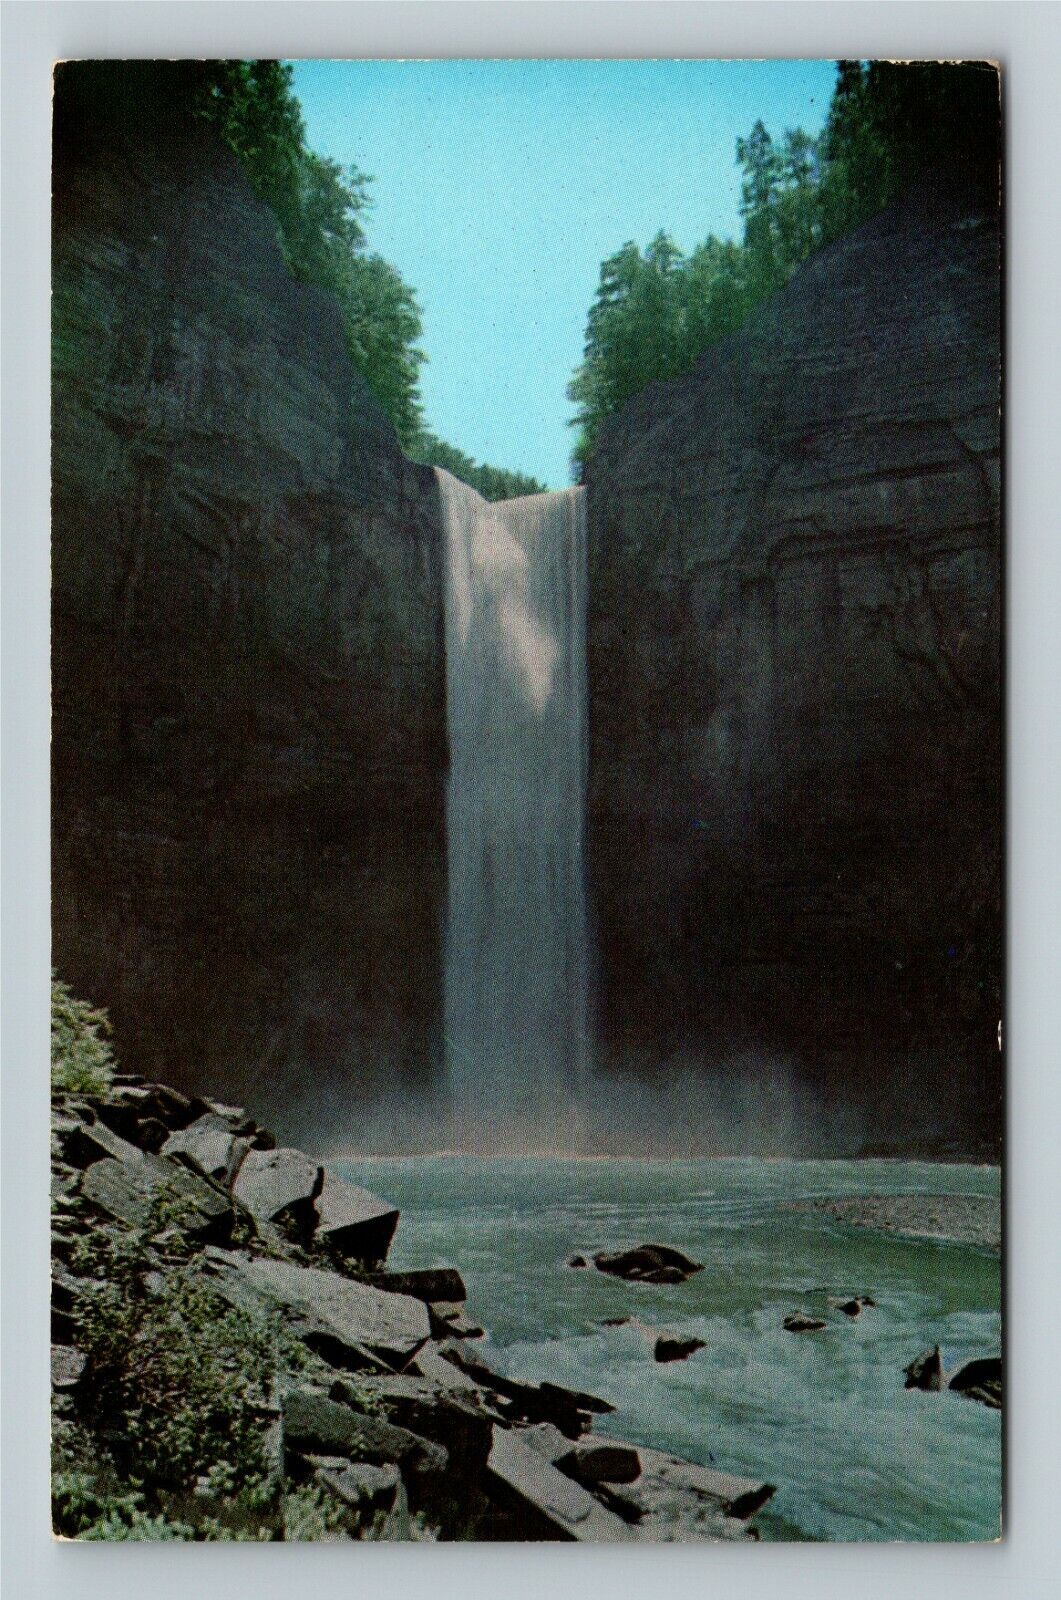 Taughannock Falls NY-New York, Finger Lakes, Scenic View, c1963 Vintage Postcard